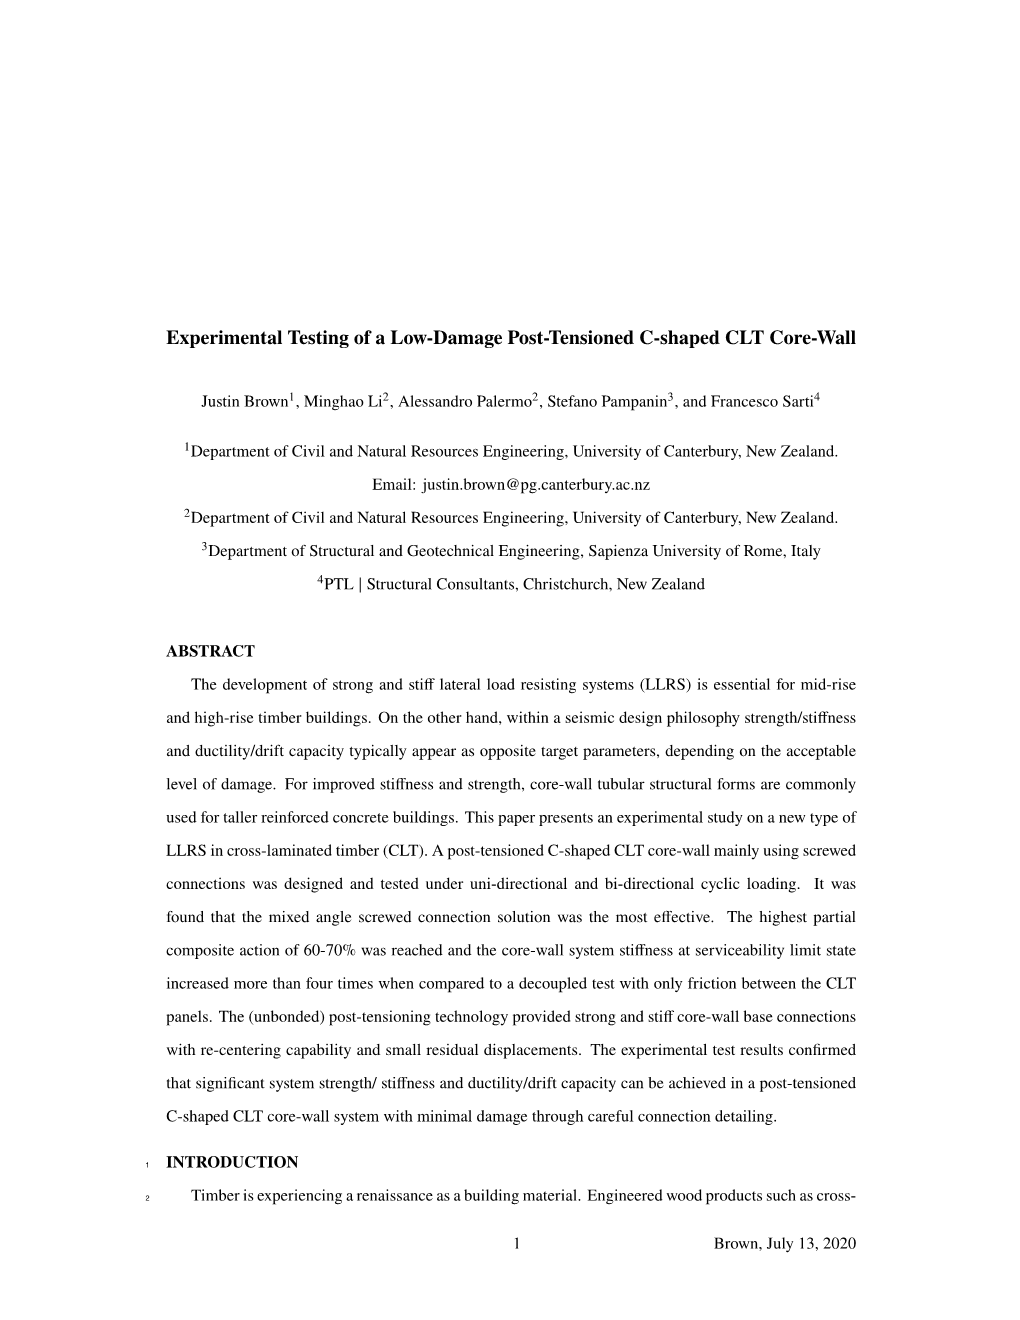 Experimental Testing of a Low-Damage Post-Tensioned C-Shaped CLT Core-Wall